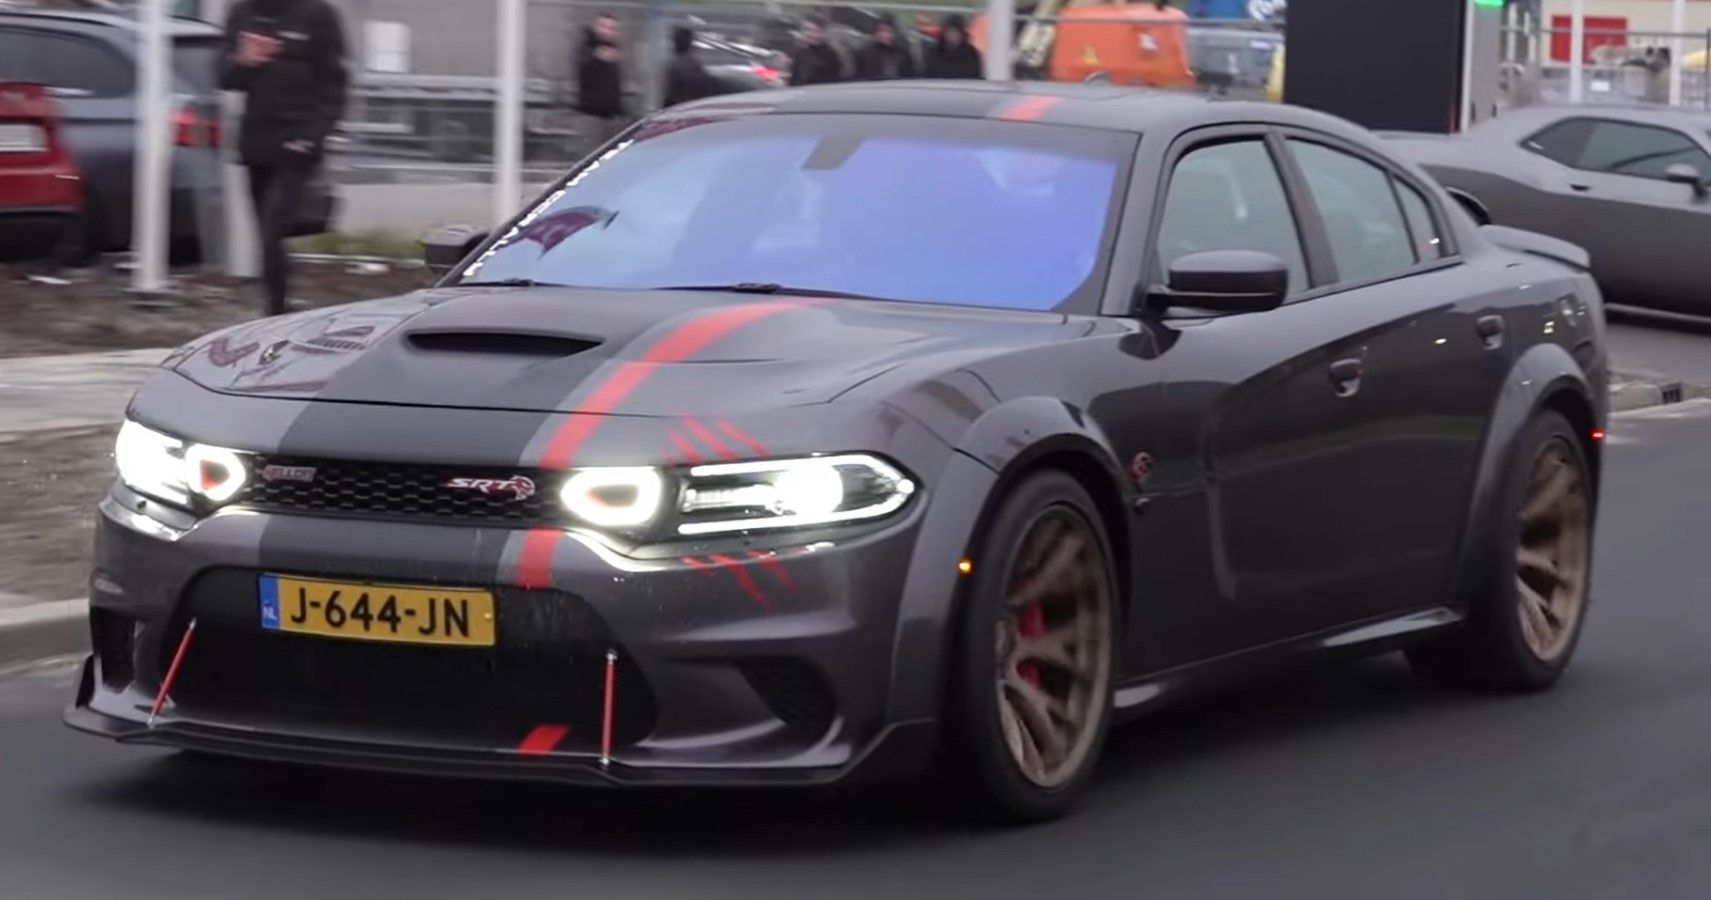 Modified Dodge Charger Hellcat front third quarter rolling view